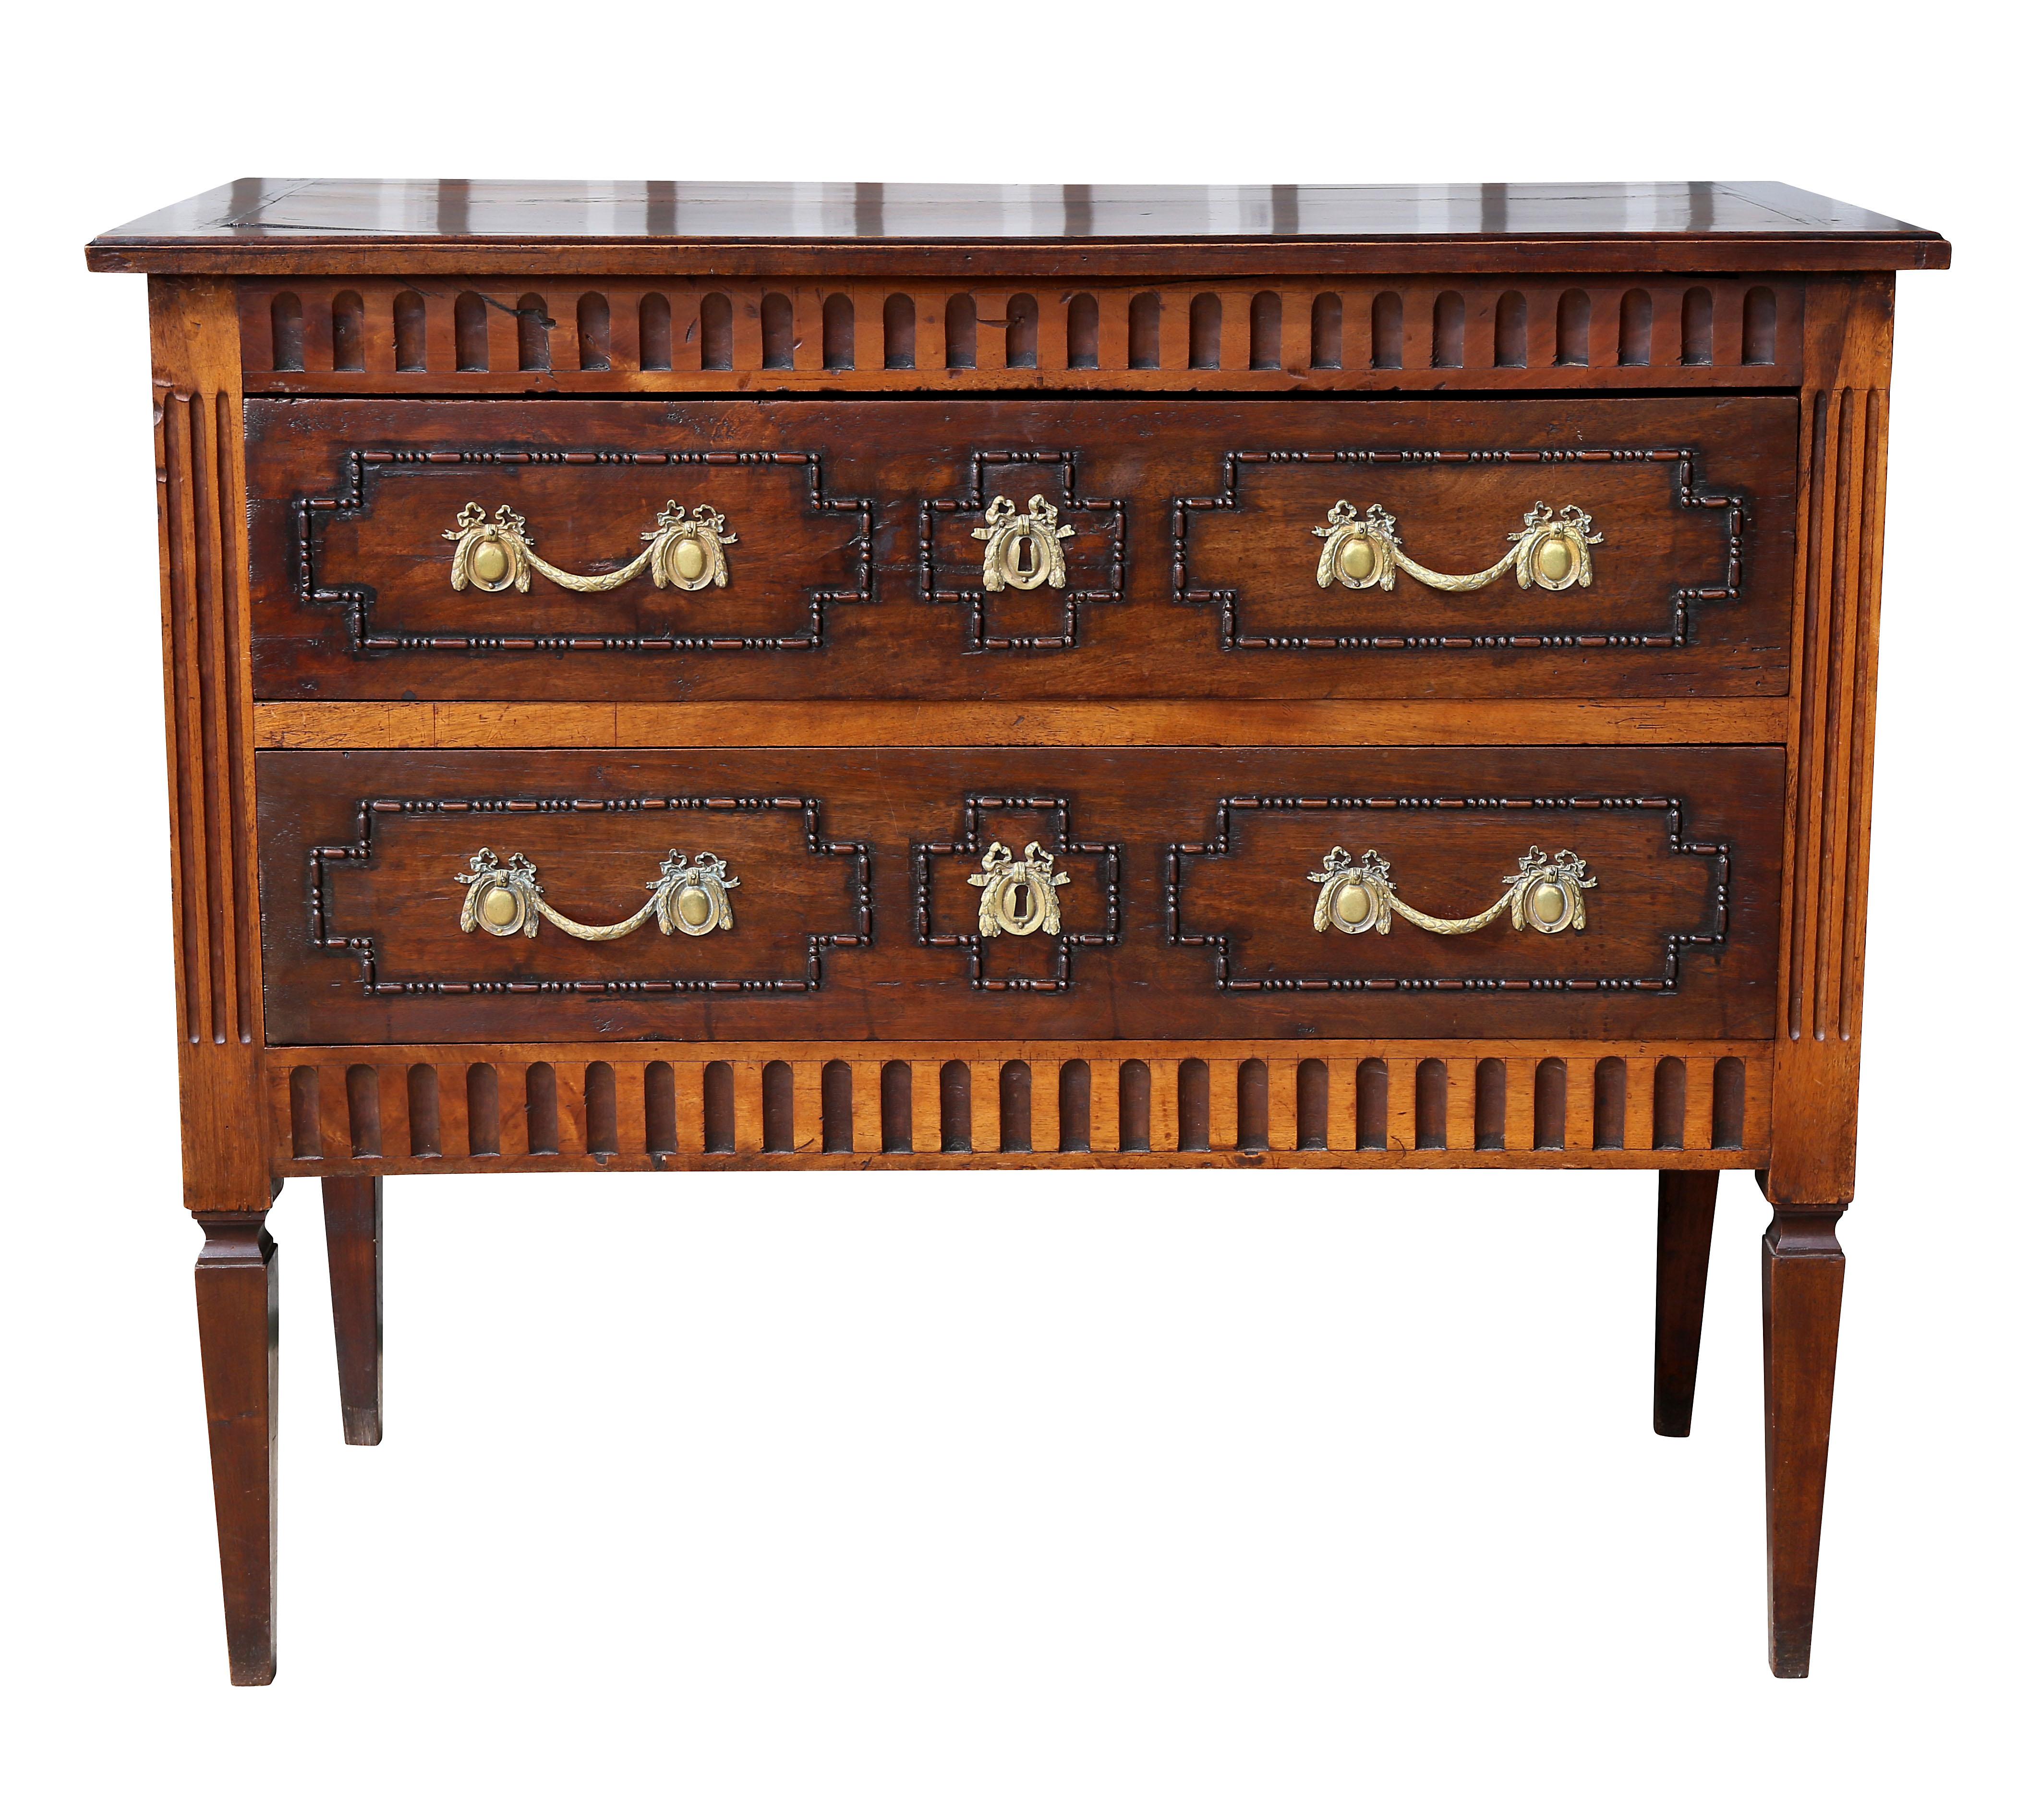 With rectangular top over two drawers with carved beaded decoration and fluting between drawers, raised on square tapered legs.